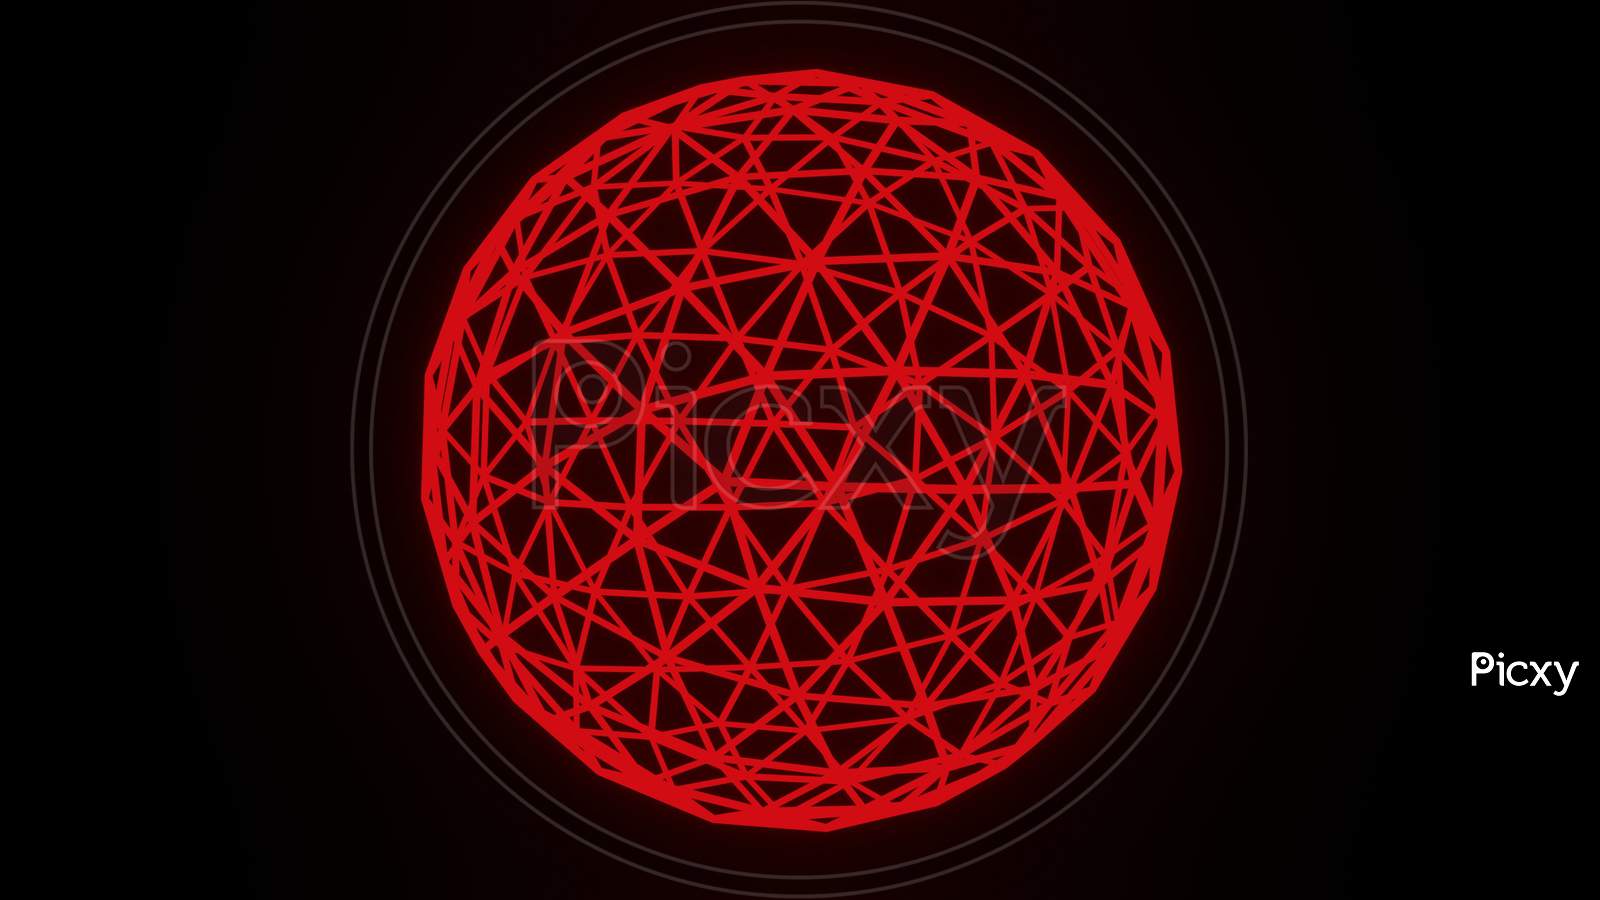 Illustration Graphic Of Red Wireframe Sphere Or Circle, Isolated On Black Background Seamless Loop Design. Illustration Abstract Polygon Globe.